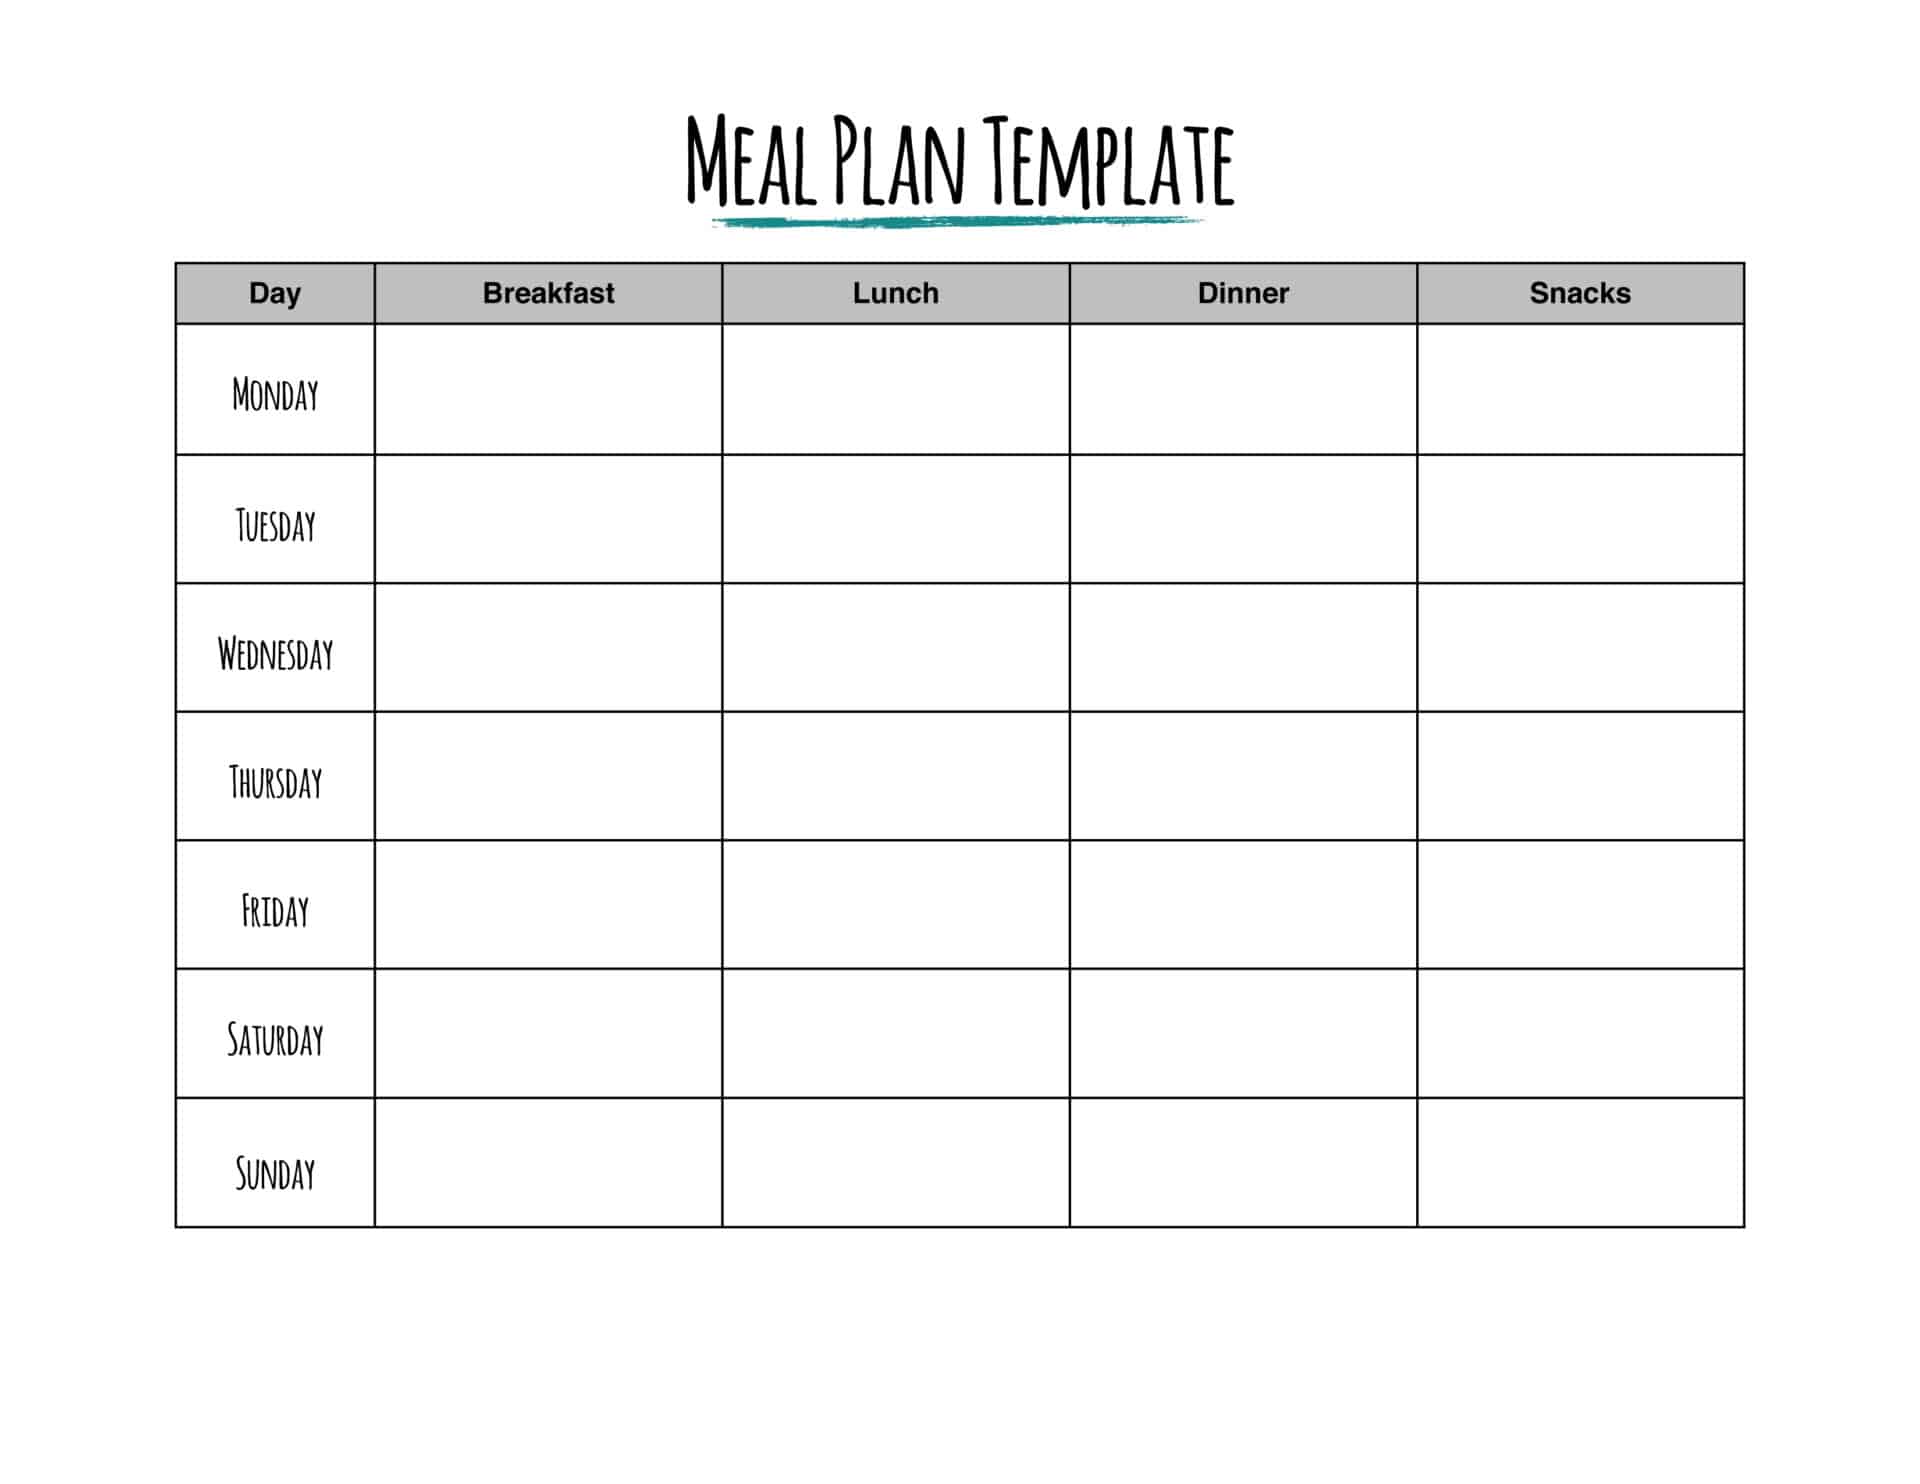 HUNGRY FOR SAVINGS TRY A MEAL PLAN Rags To Reasonable